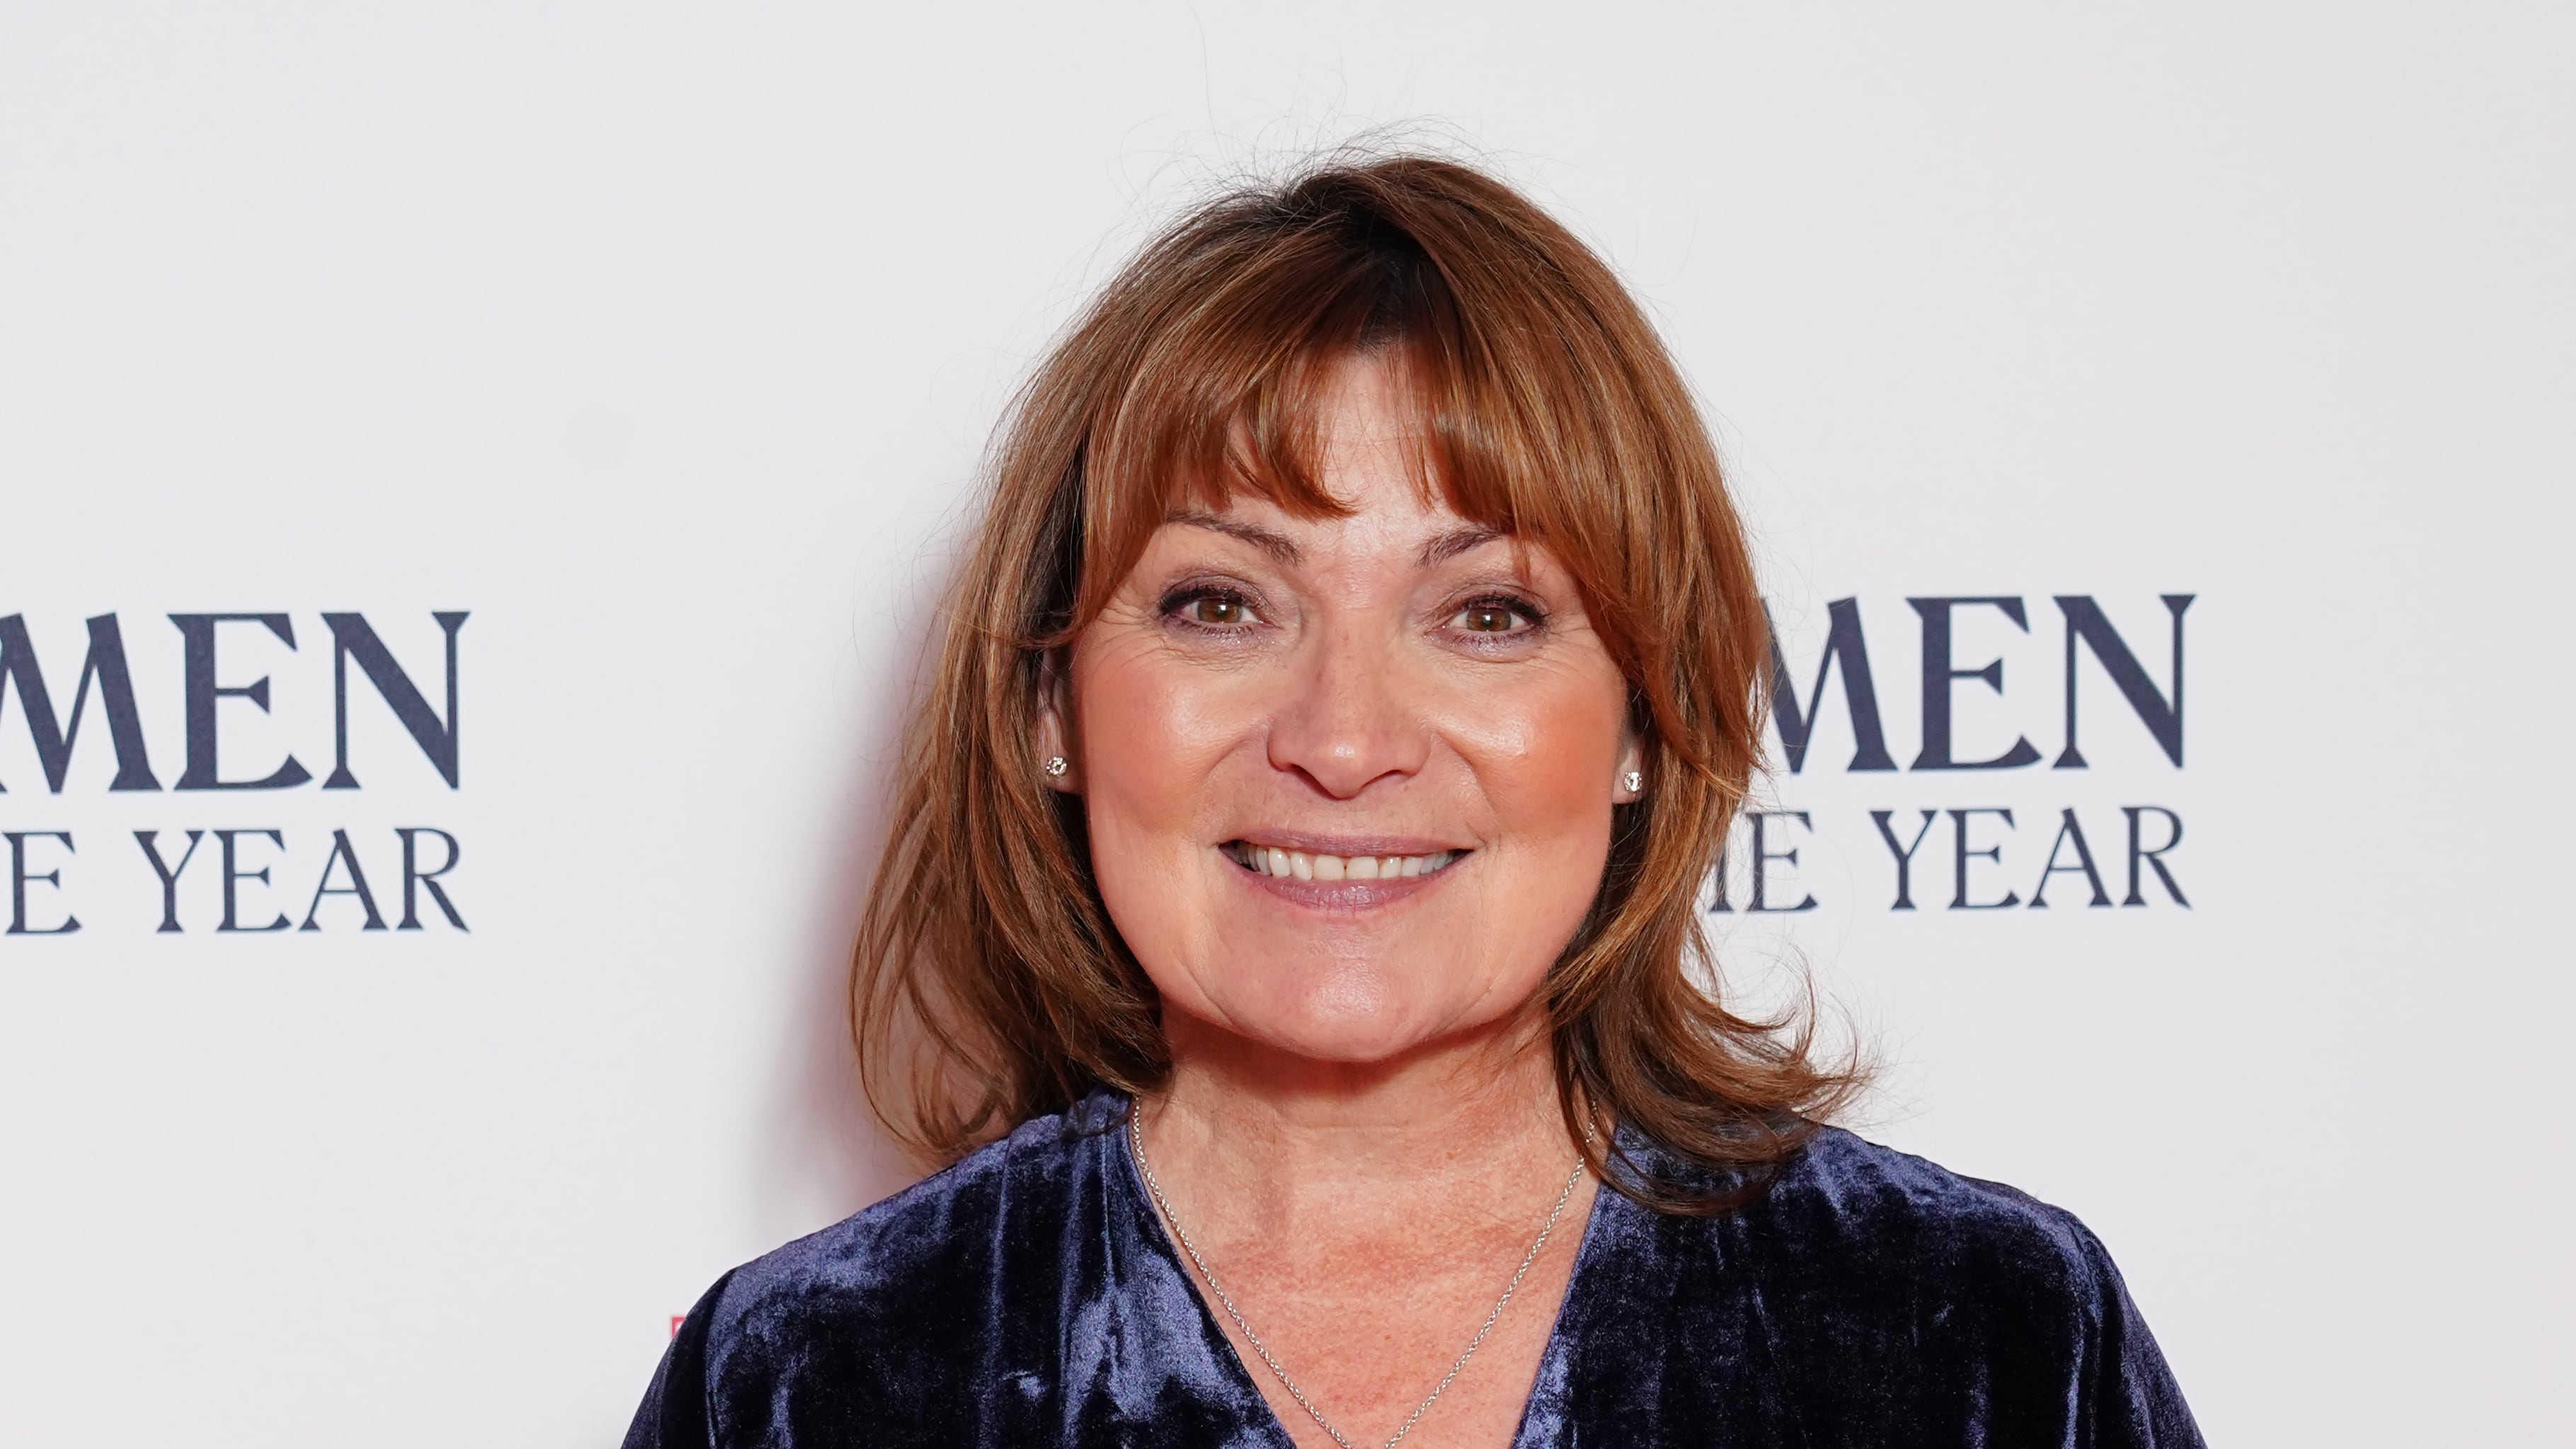 Lorraine Kelly has spoken about what it was like to suffer a miscarriage